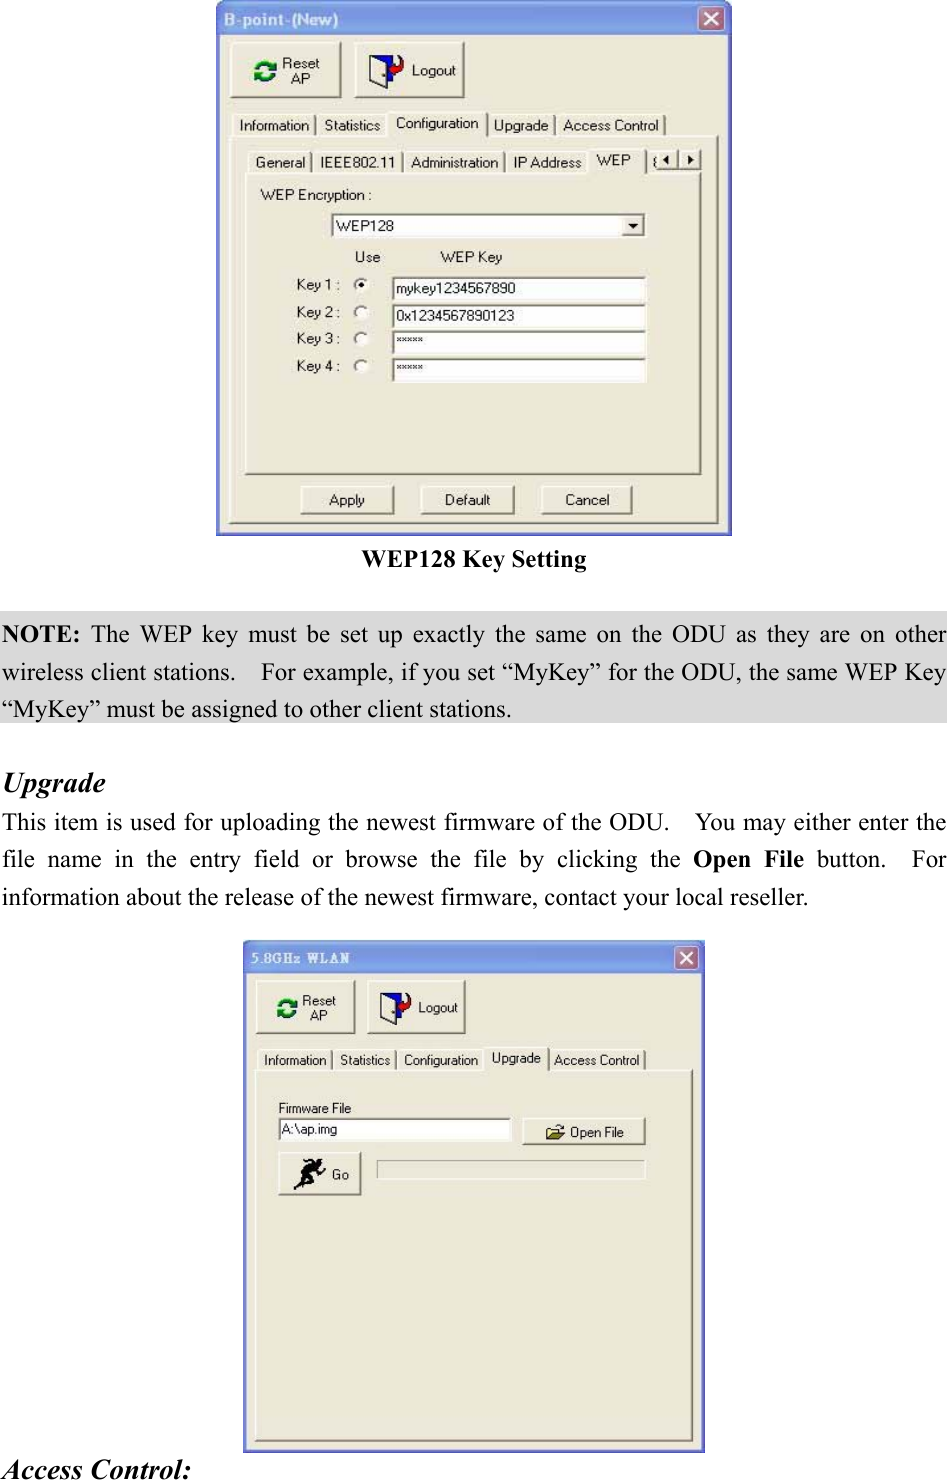  WEP128 Key Setting  NOTE: The WEP key must be set up exactly the same on the ODU as they are on other wireless client stations.    For example, if you set “MyKey” for the ODU, the same WEP Key “MyKey” must be assigned to other client stations.  Upgrade This item is used for uploading the newest firmware of the ODU.    You may either enter the file name in the entry field or browse the file by clicking the Open File button.  For information about the release of the newest firmware, contact your local reseller.     Access Control: 